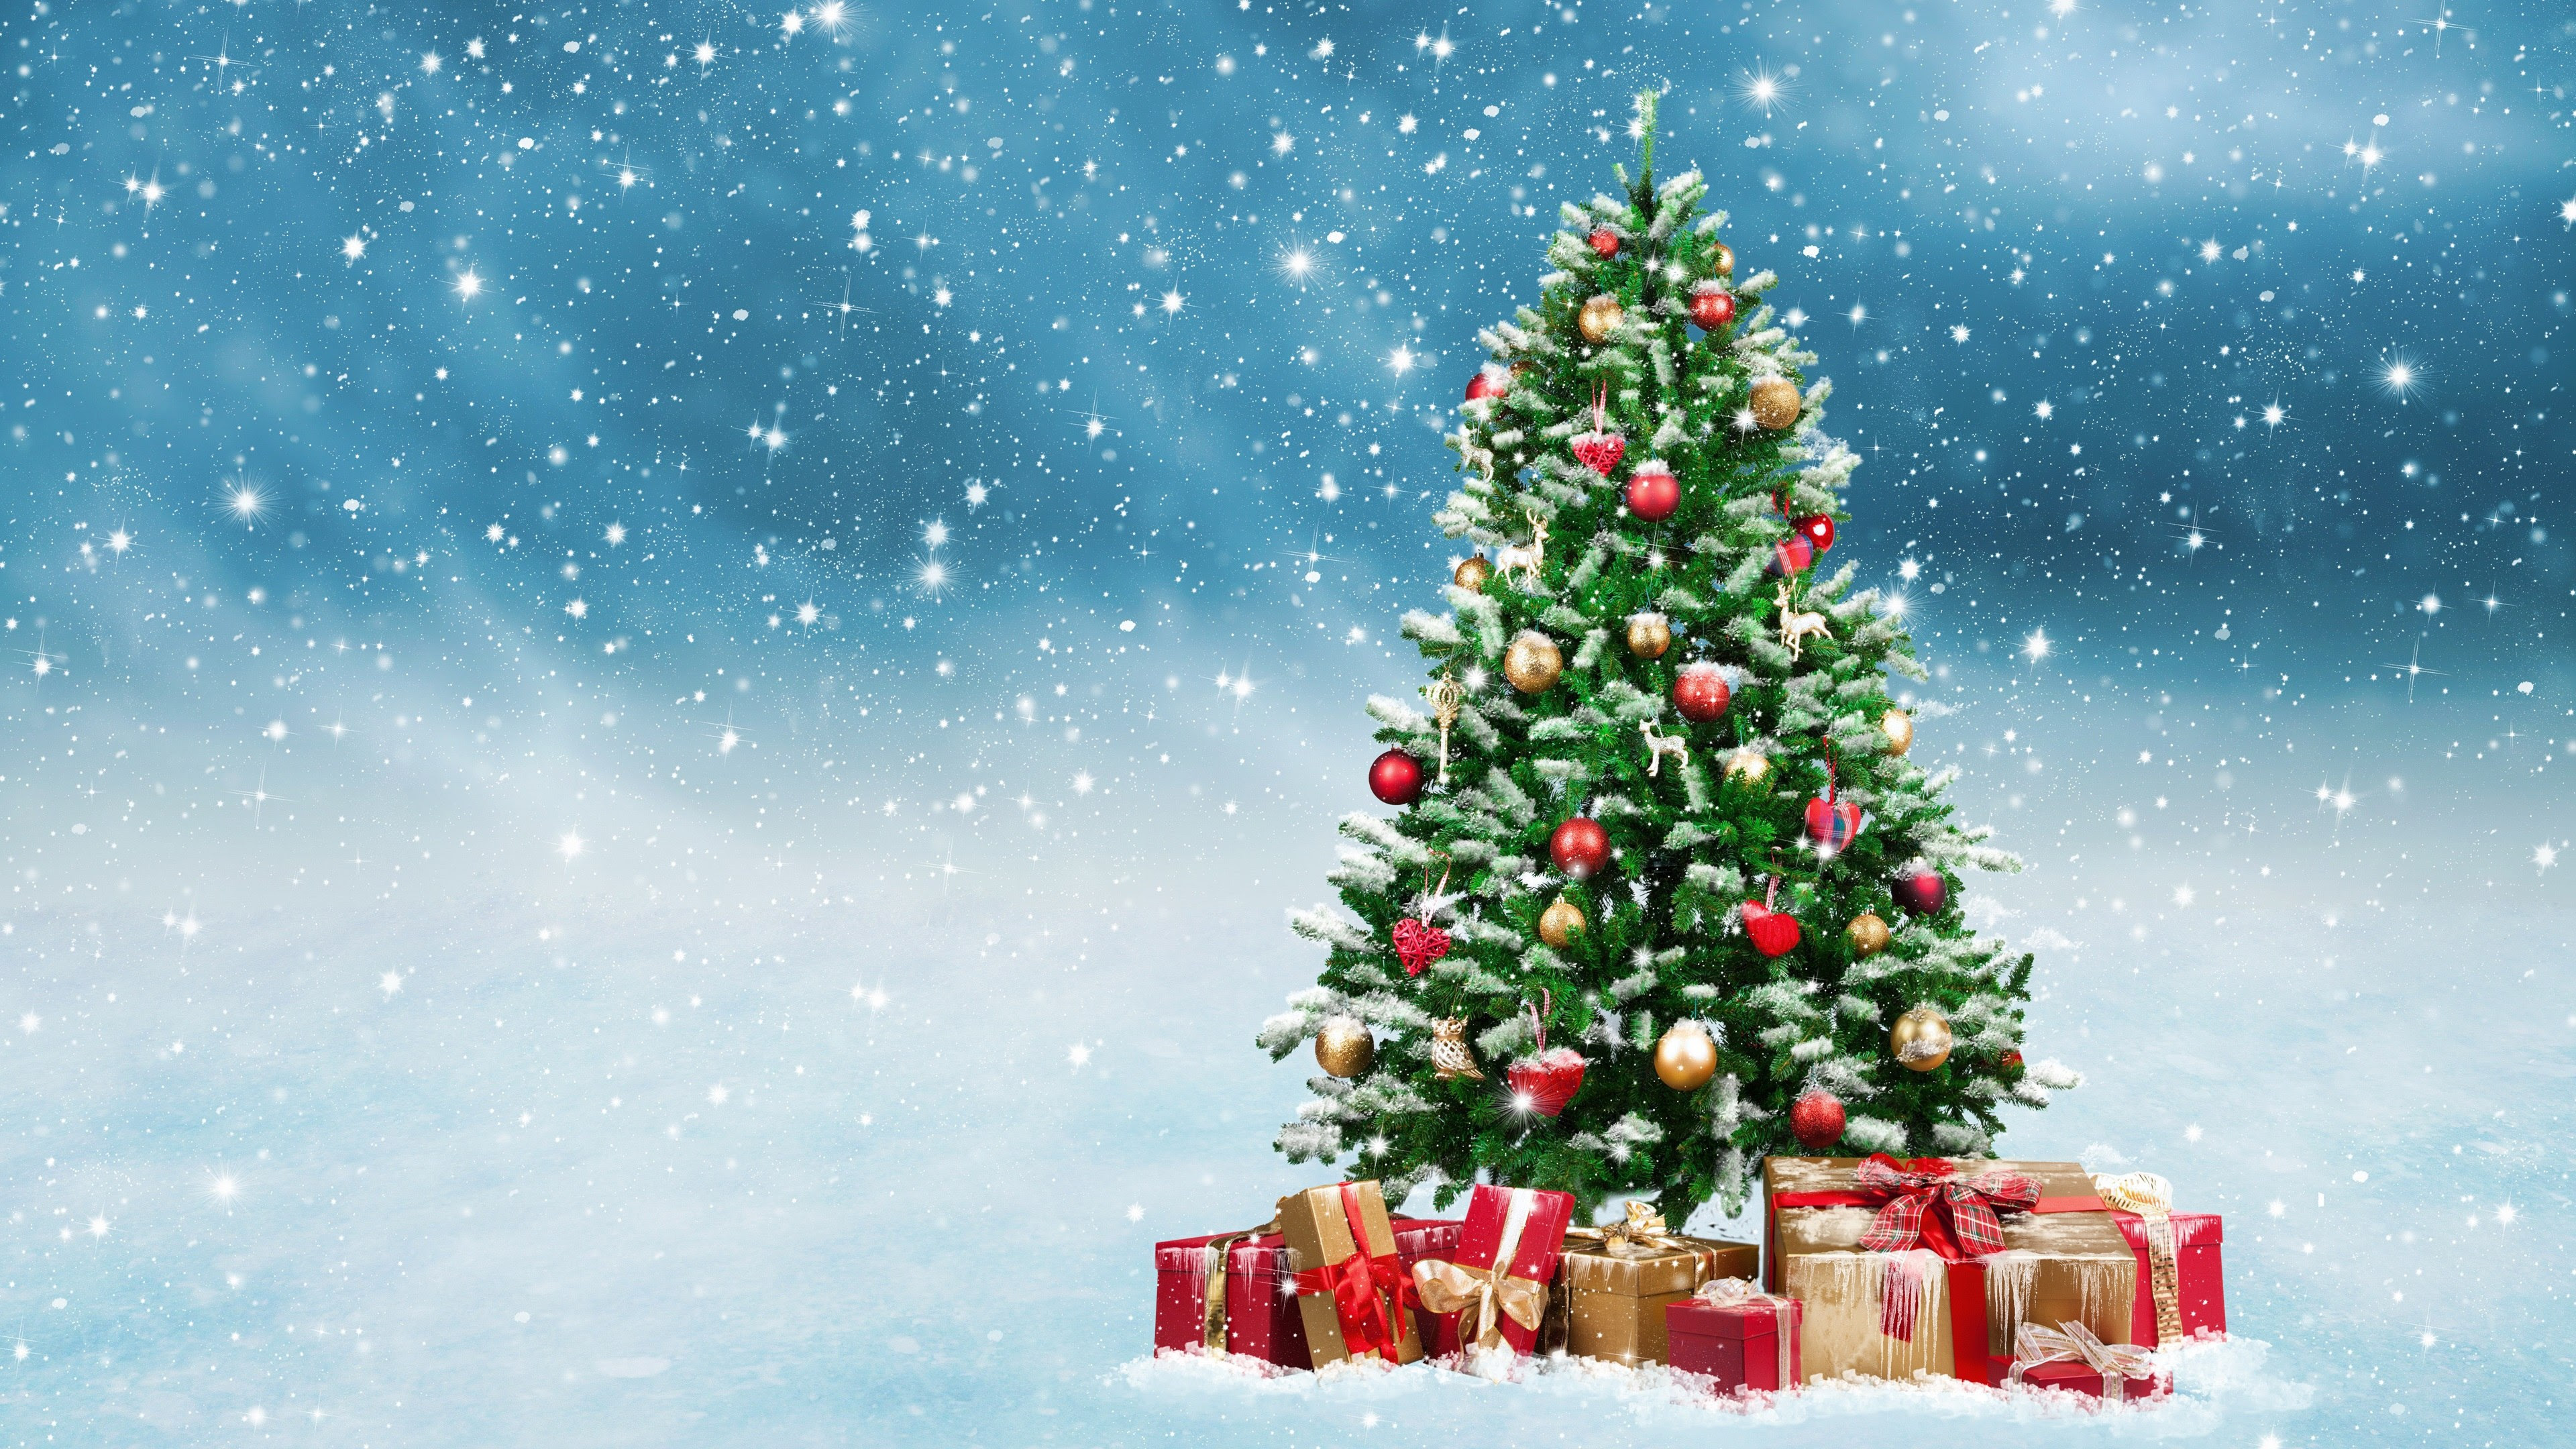 Dppicture: Christmas Tree Wallpaper 4k